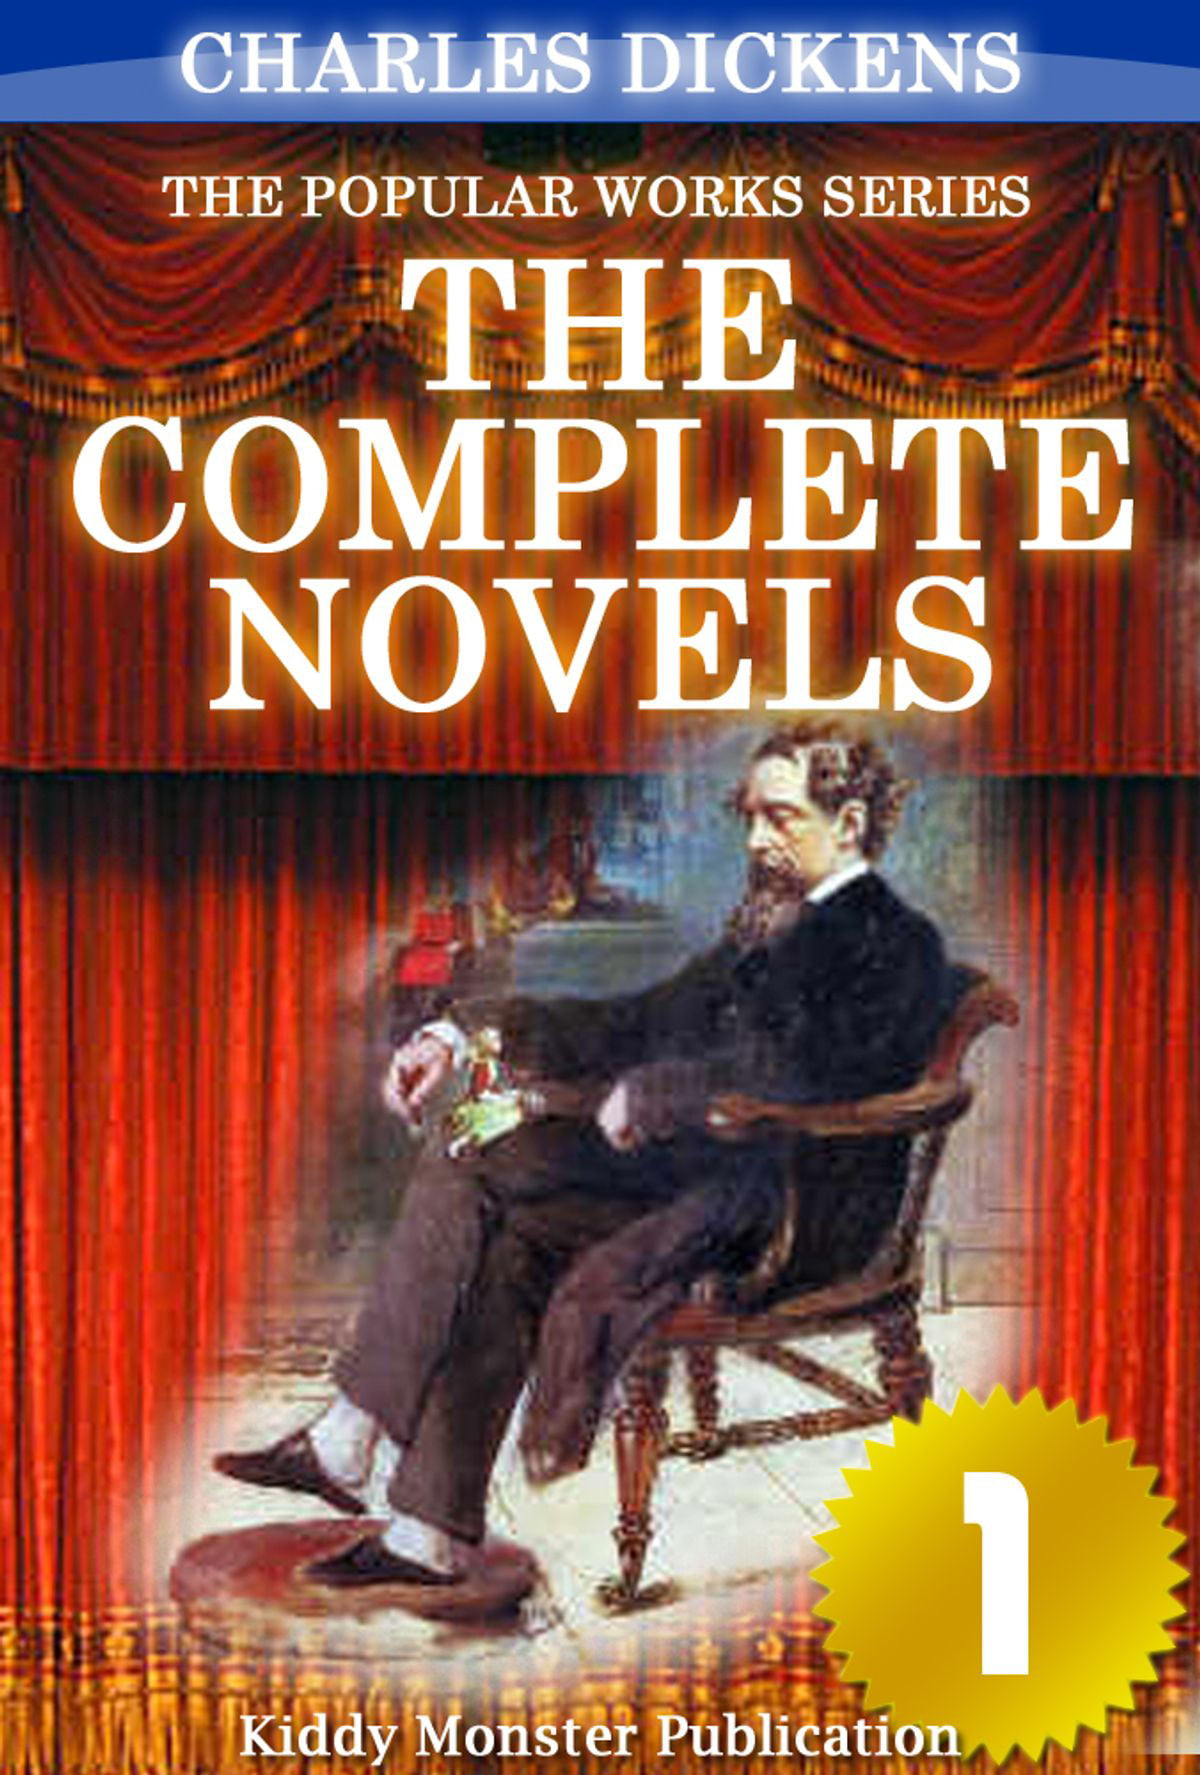 book review of famous novels